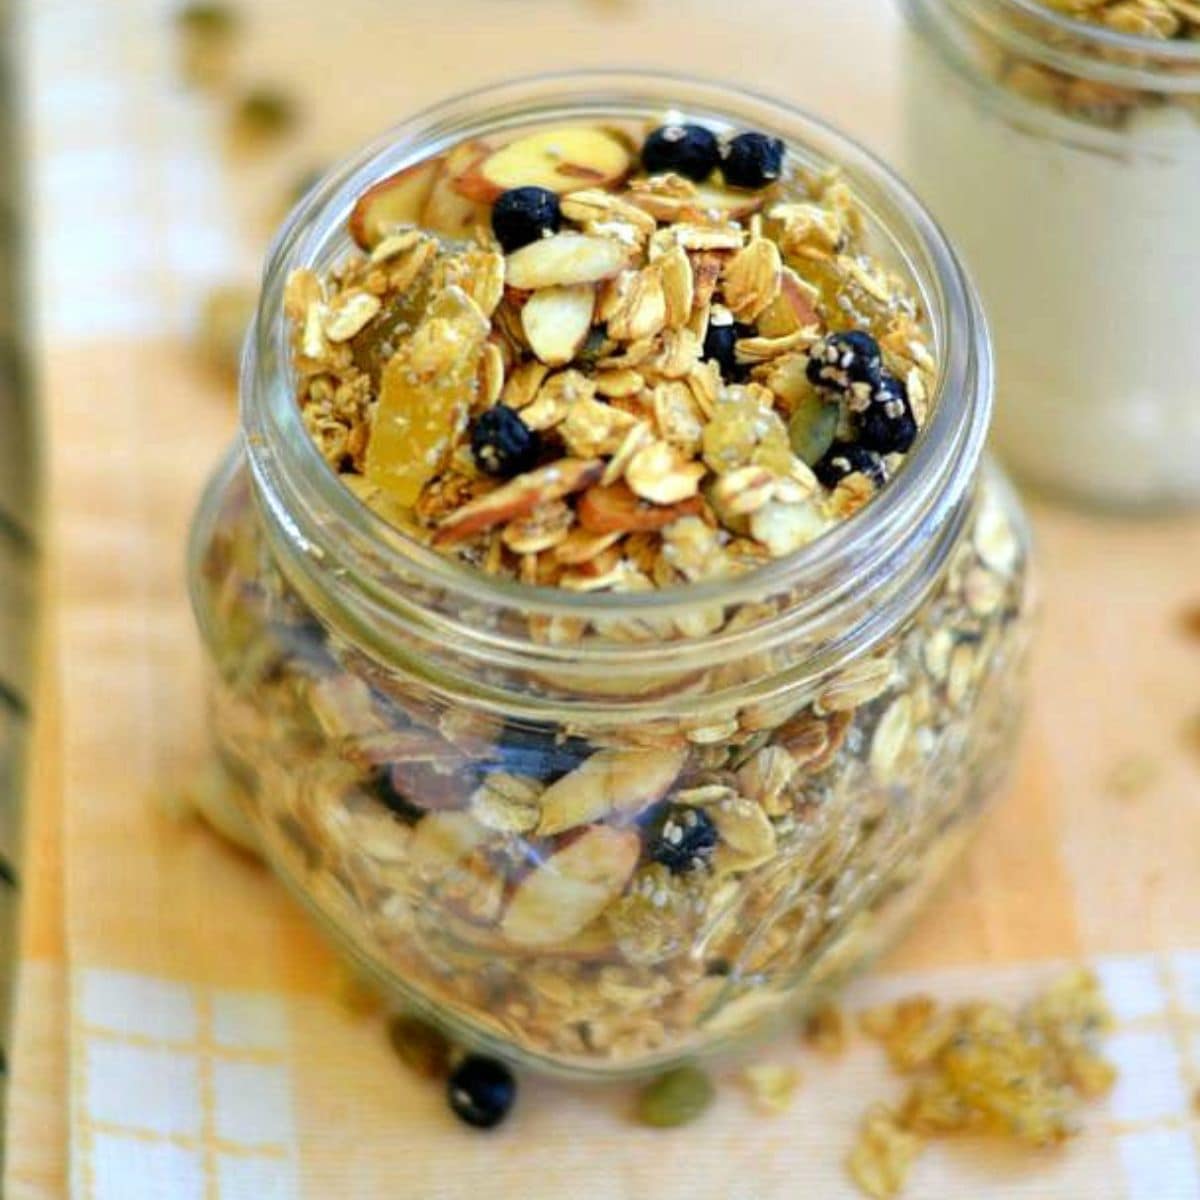 Glass jar filled with homemade pineapple blueberry granola.